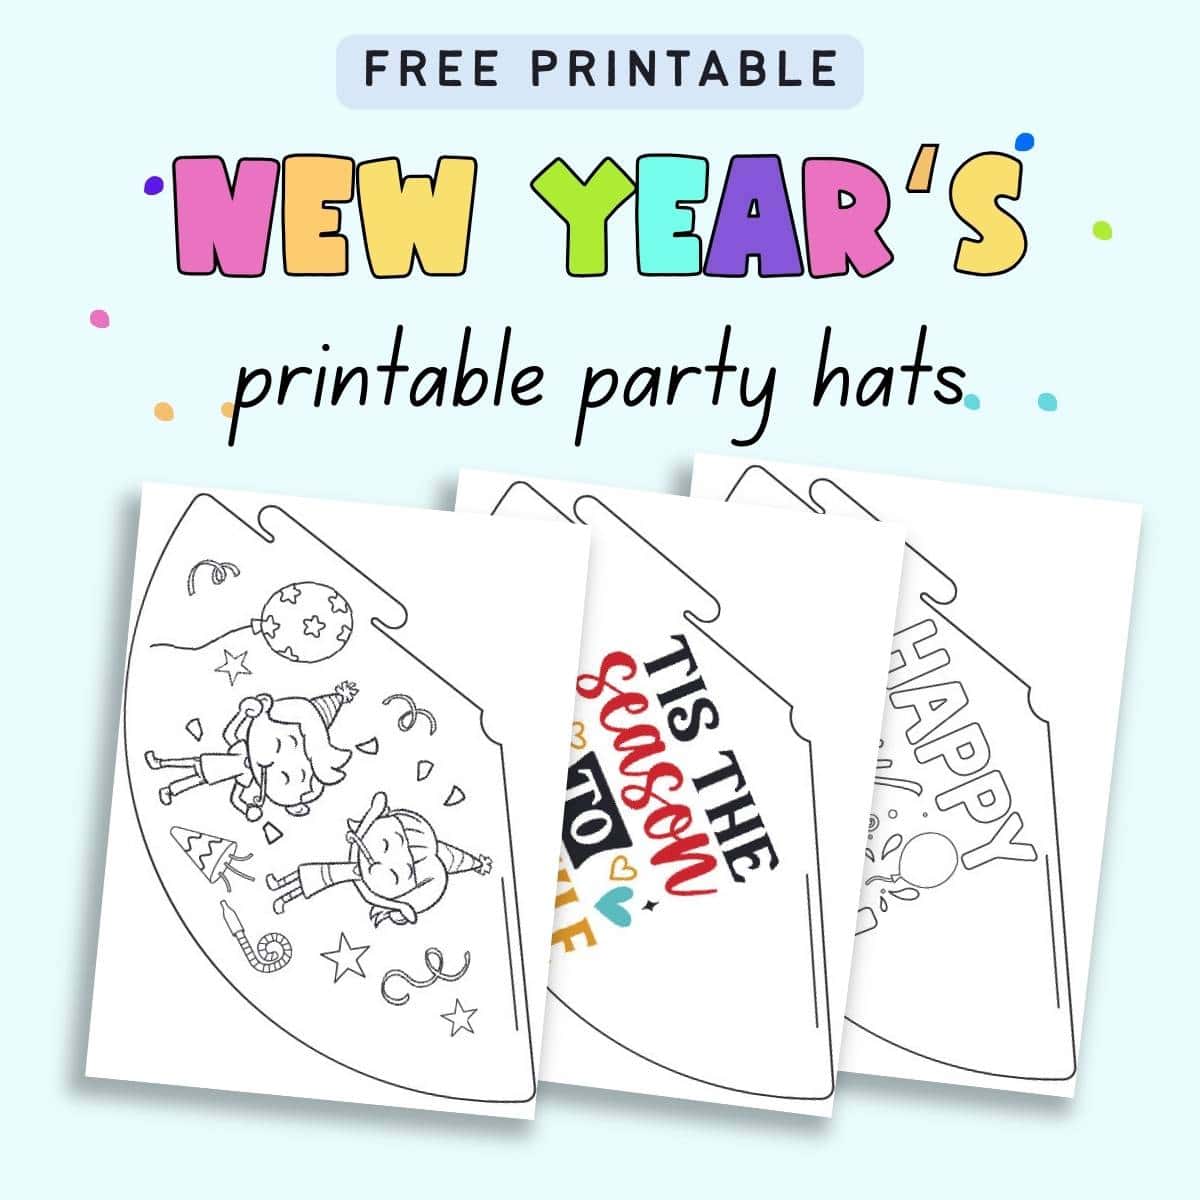 Text "free printable New Year's printable party hats" with preview images of three printable party hats. Two are black and white and one color.